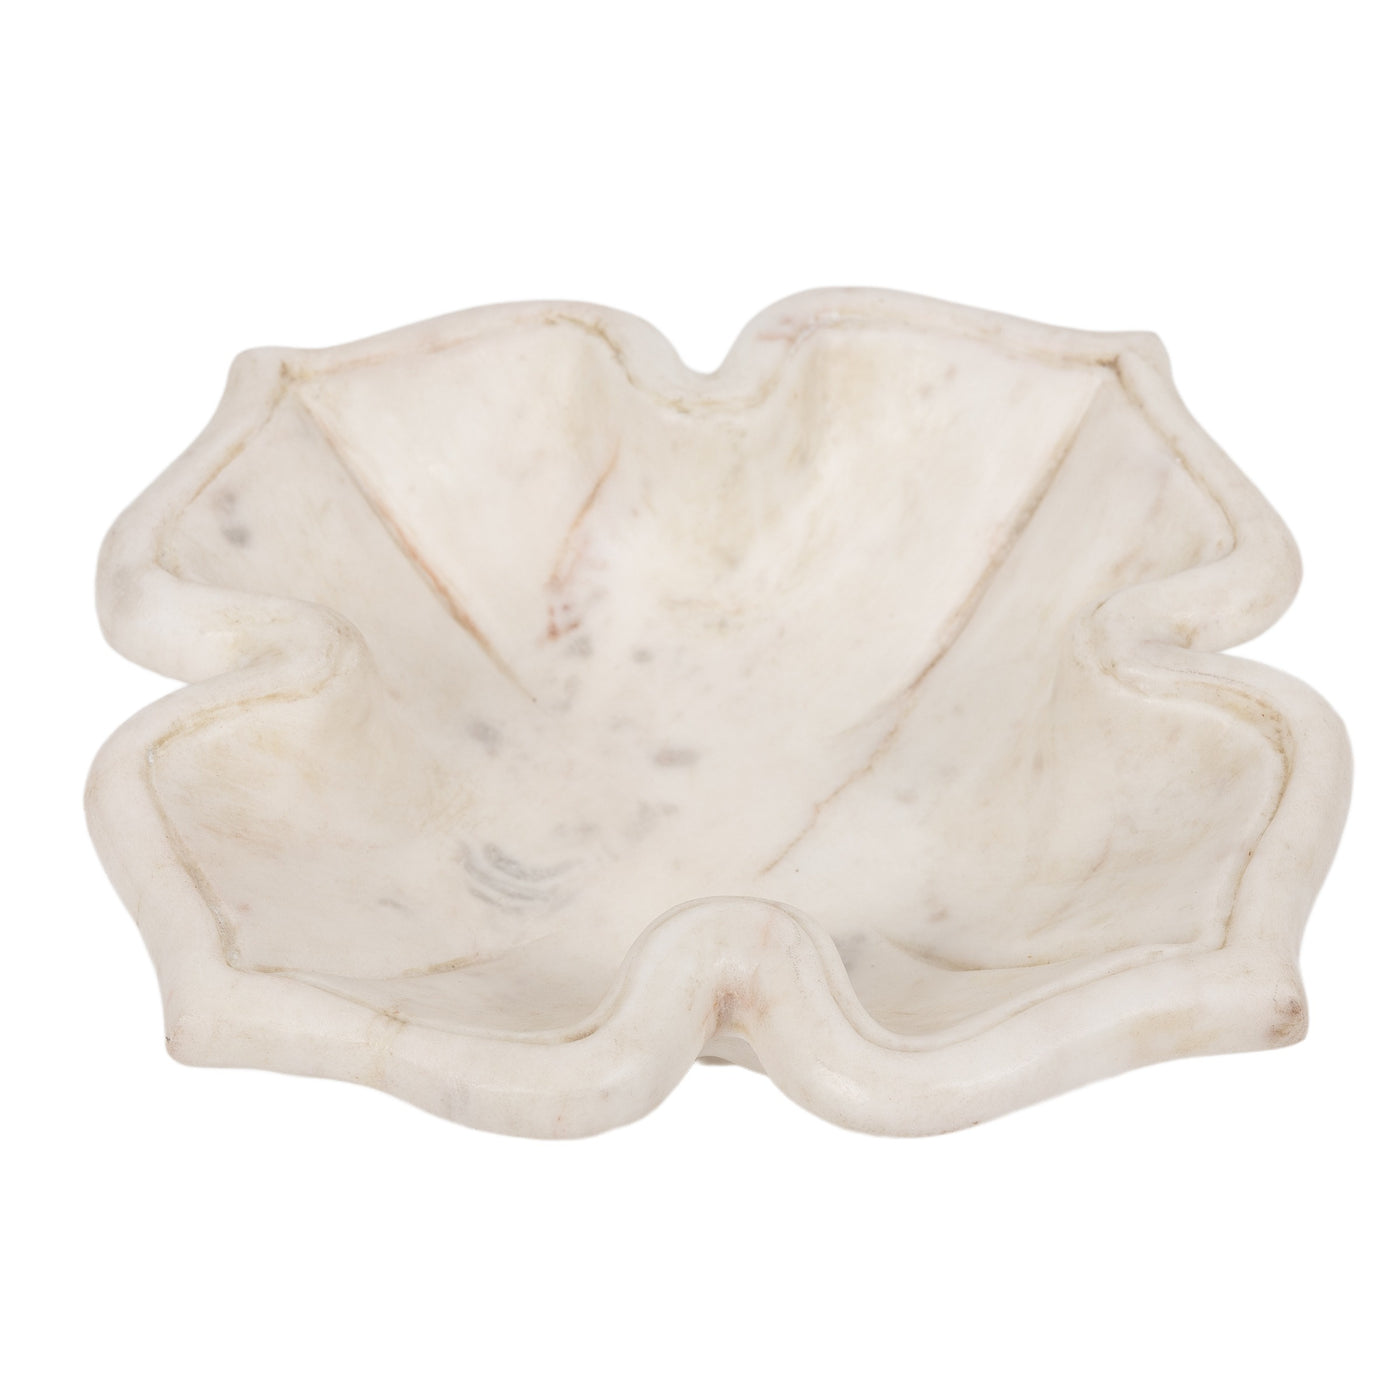 Marble Floral Bowl - Large